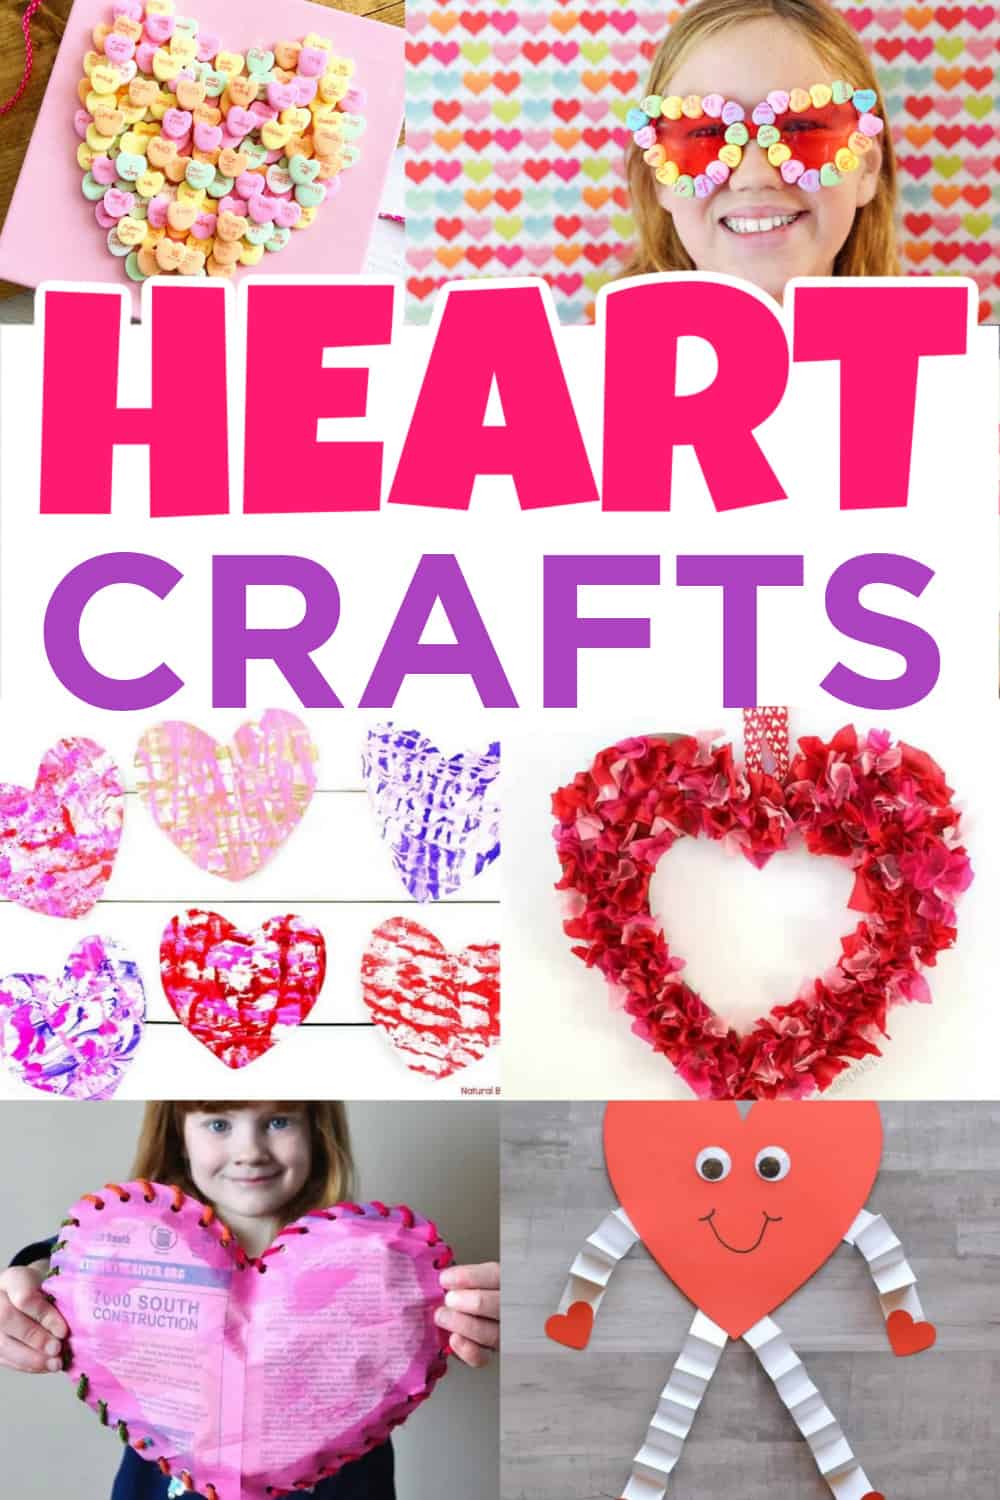 Easy and Cute Valentine's Day Heart Craft For Kids